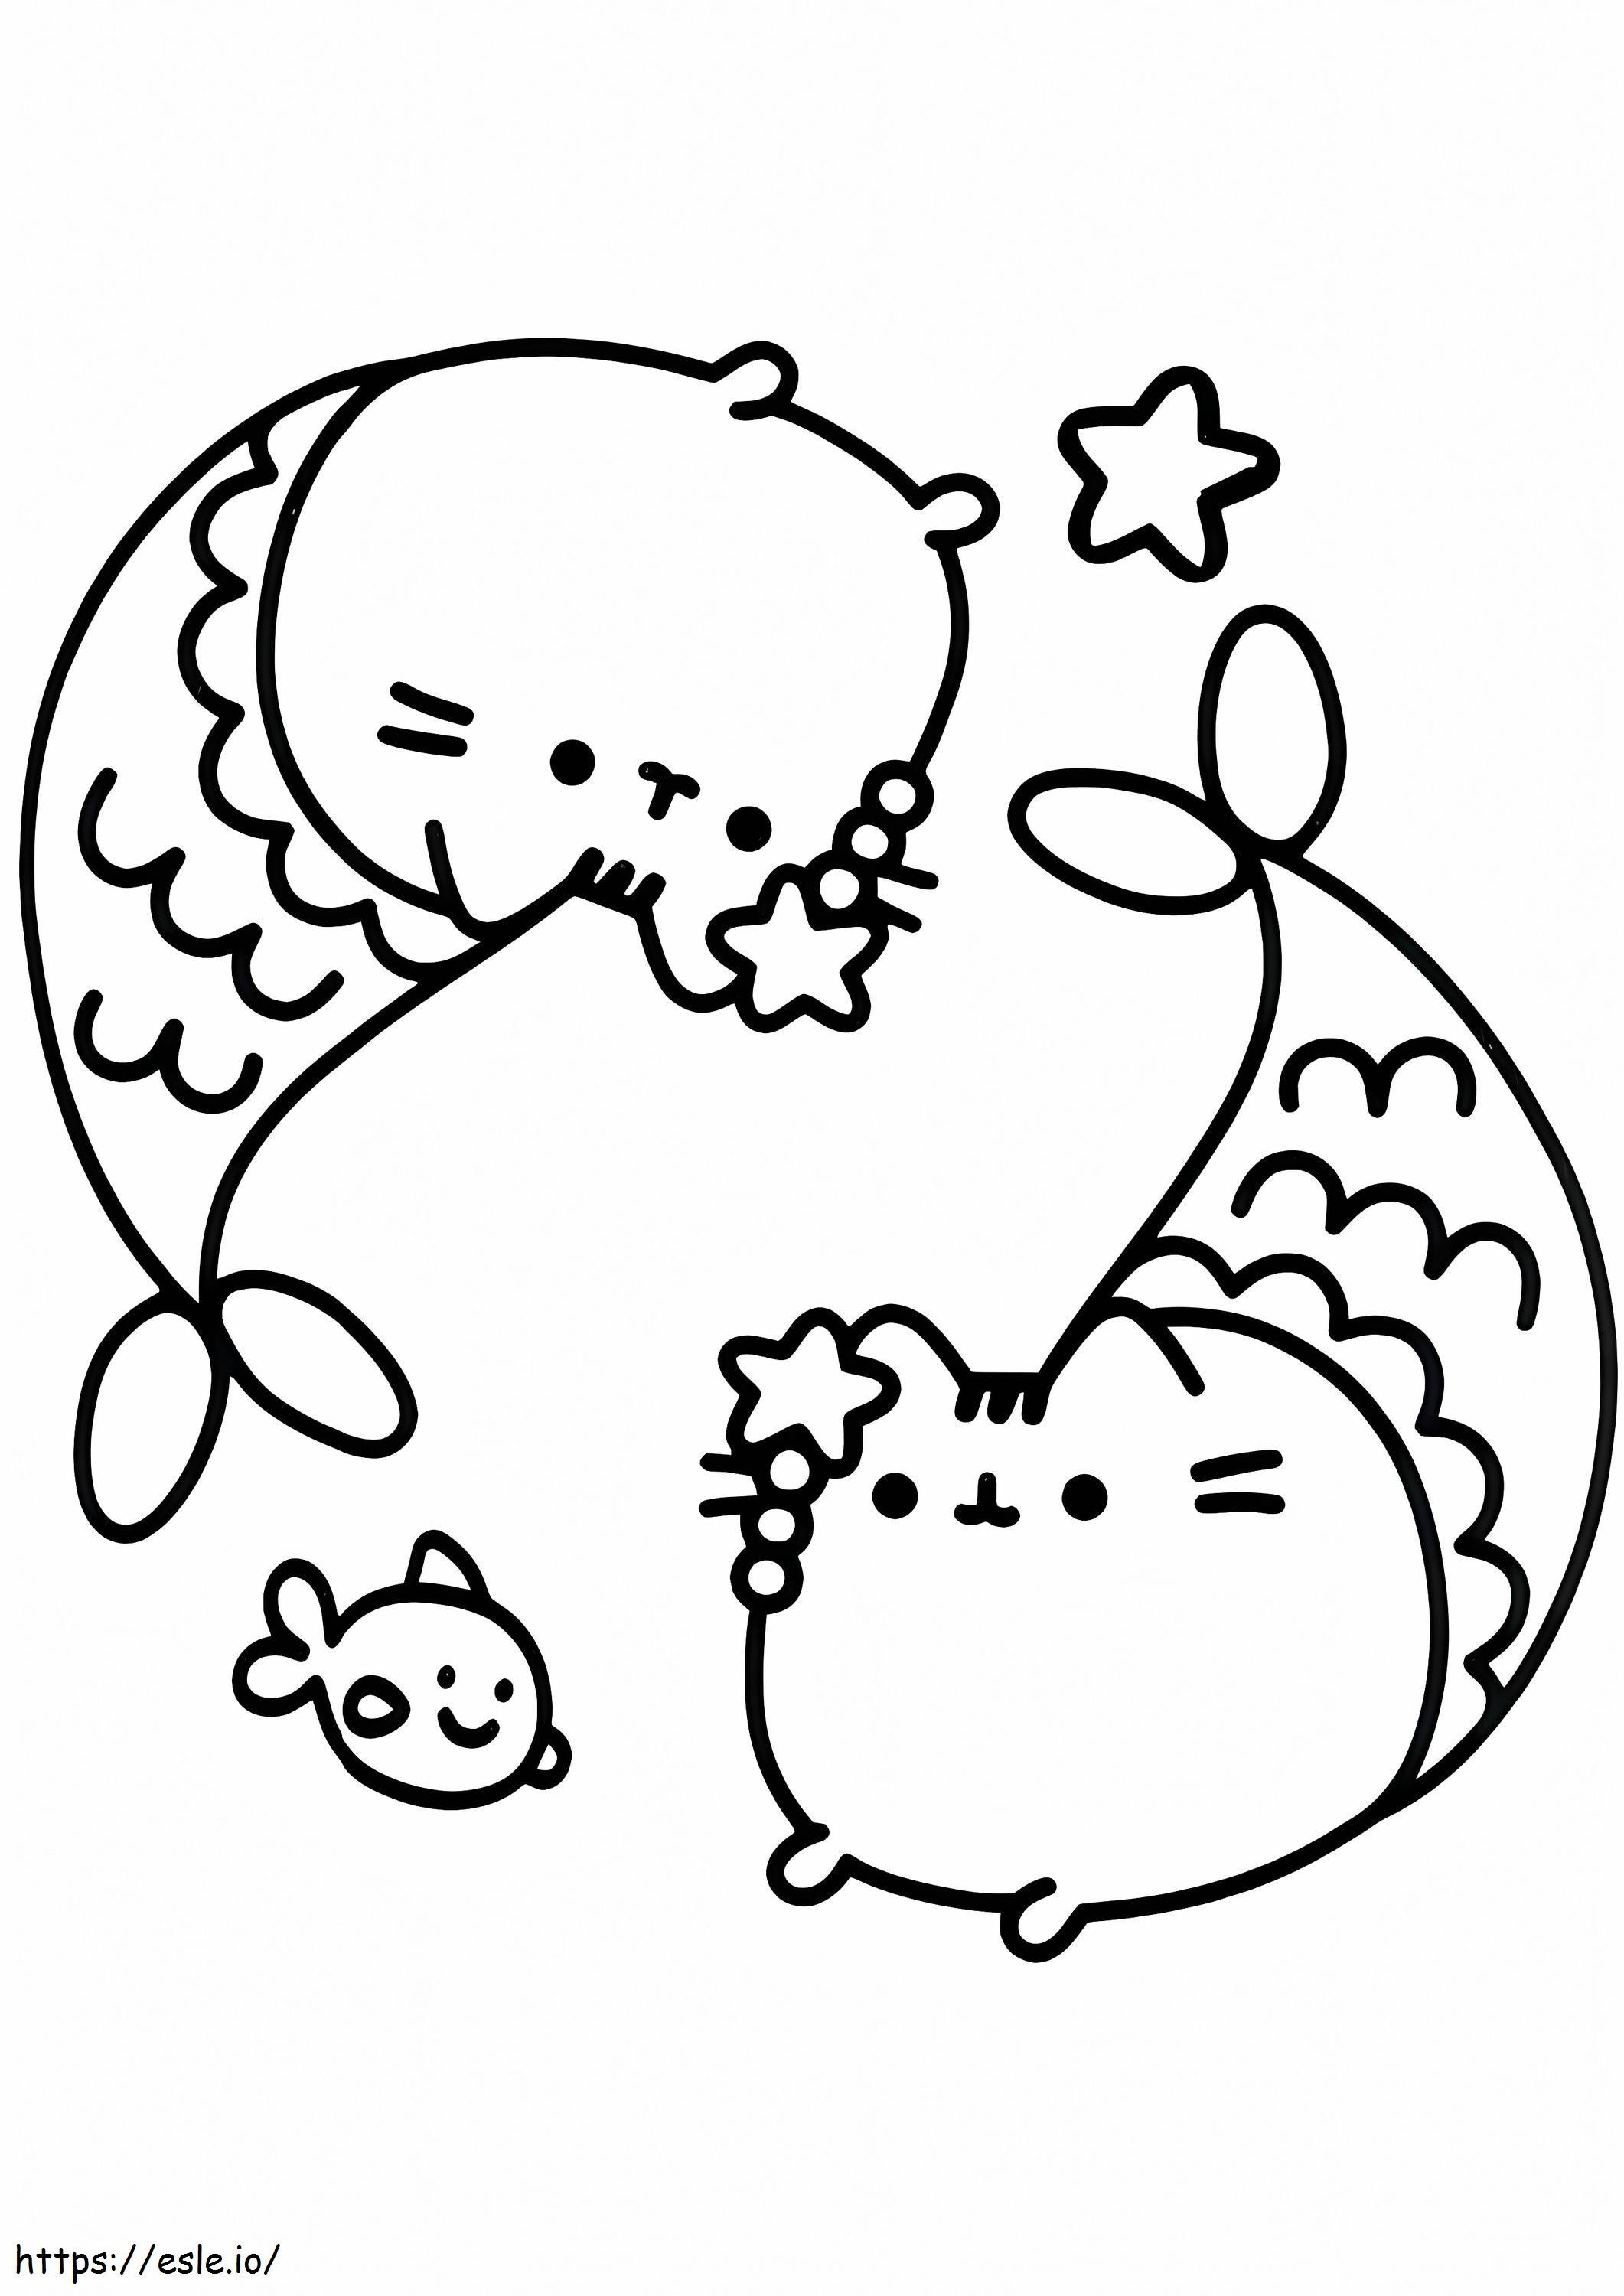 Adorable Pusheen 2 coloring page